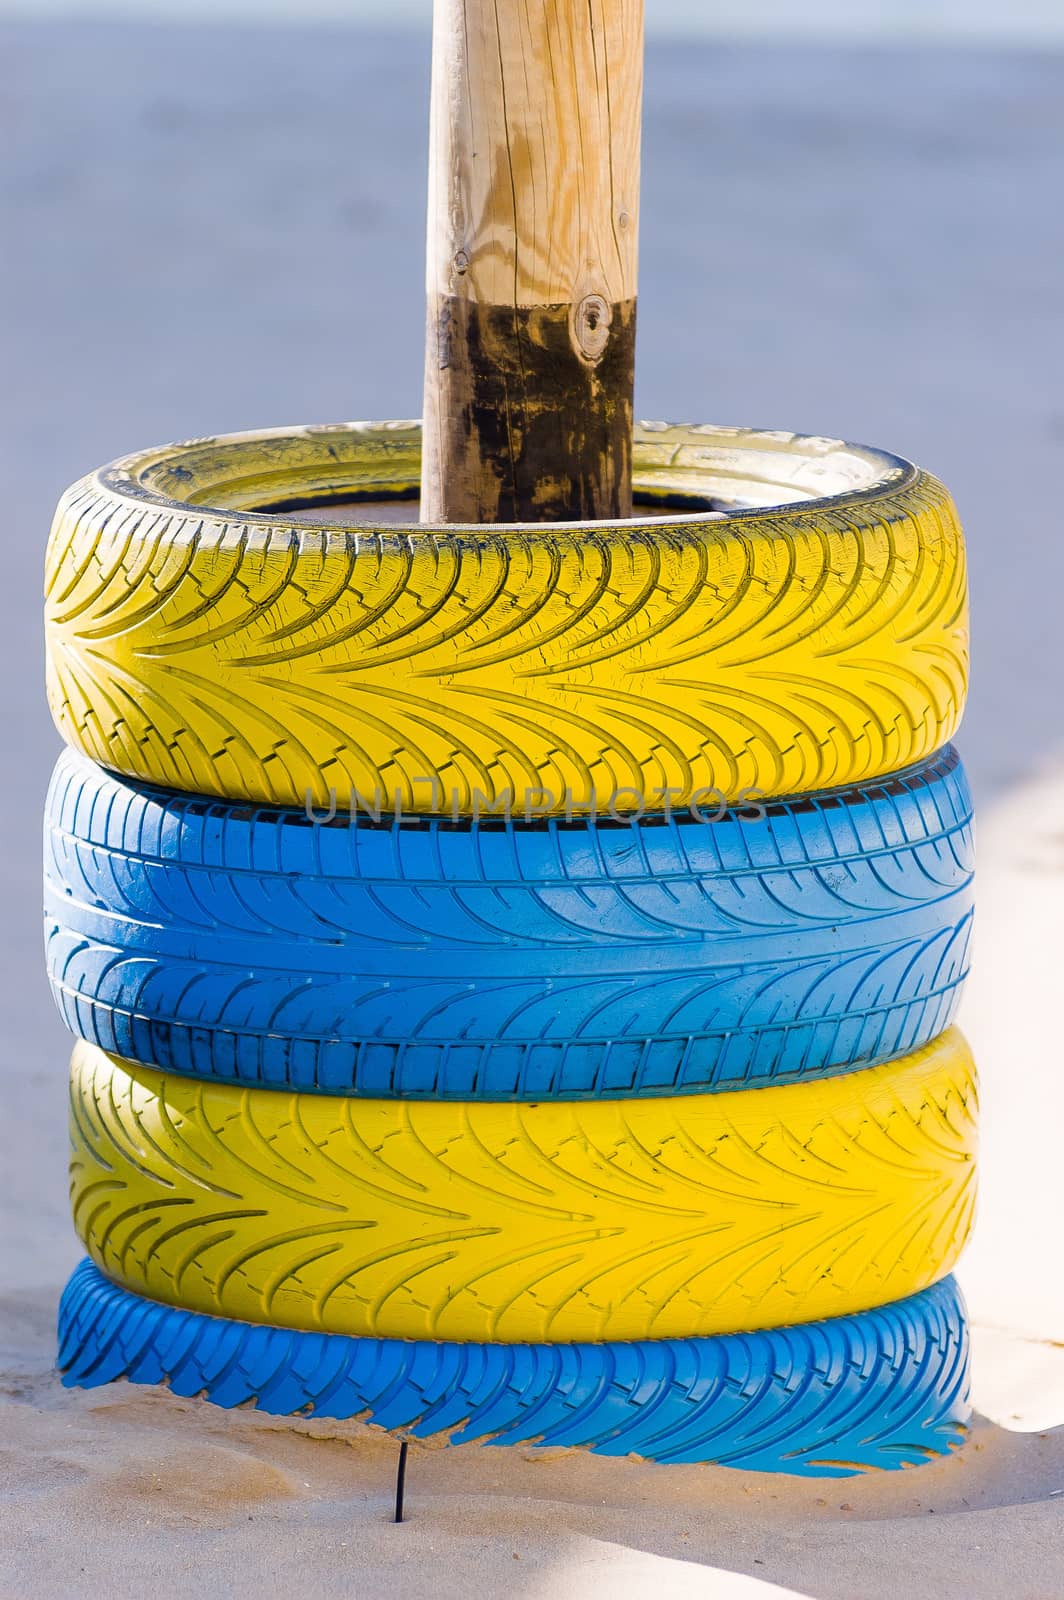 Four blue and yellow tires